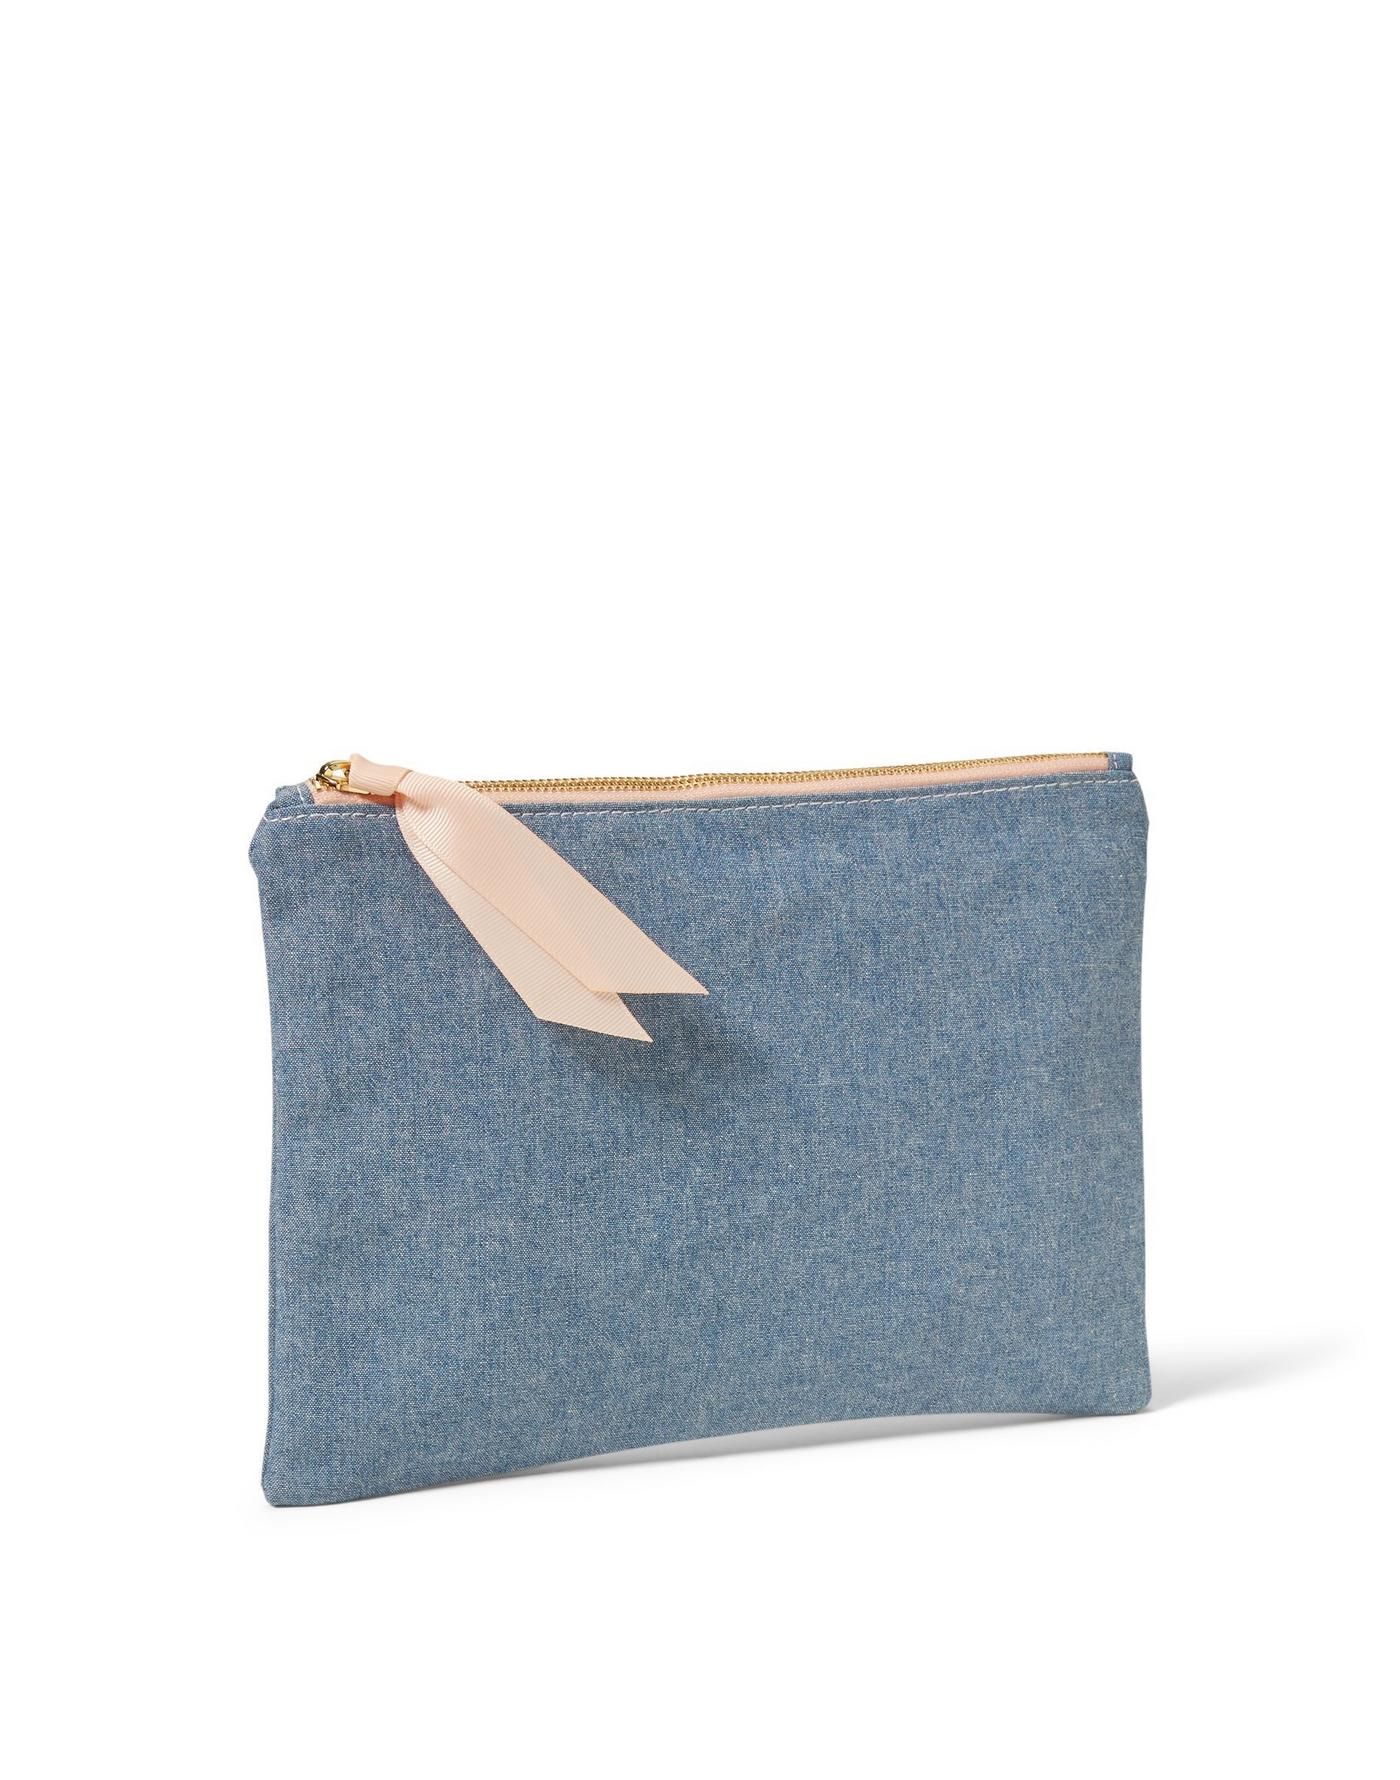 Sugar Paper Chambray Pouch | Janie and Jack